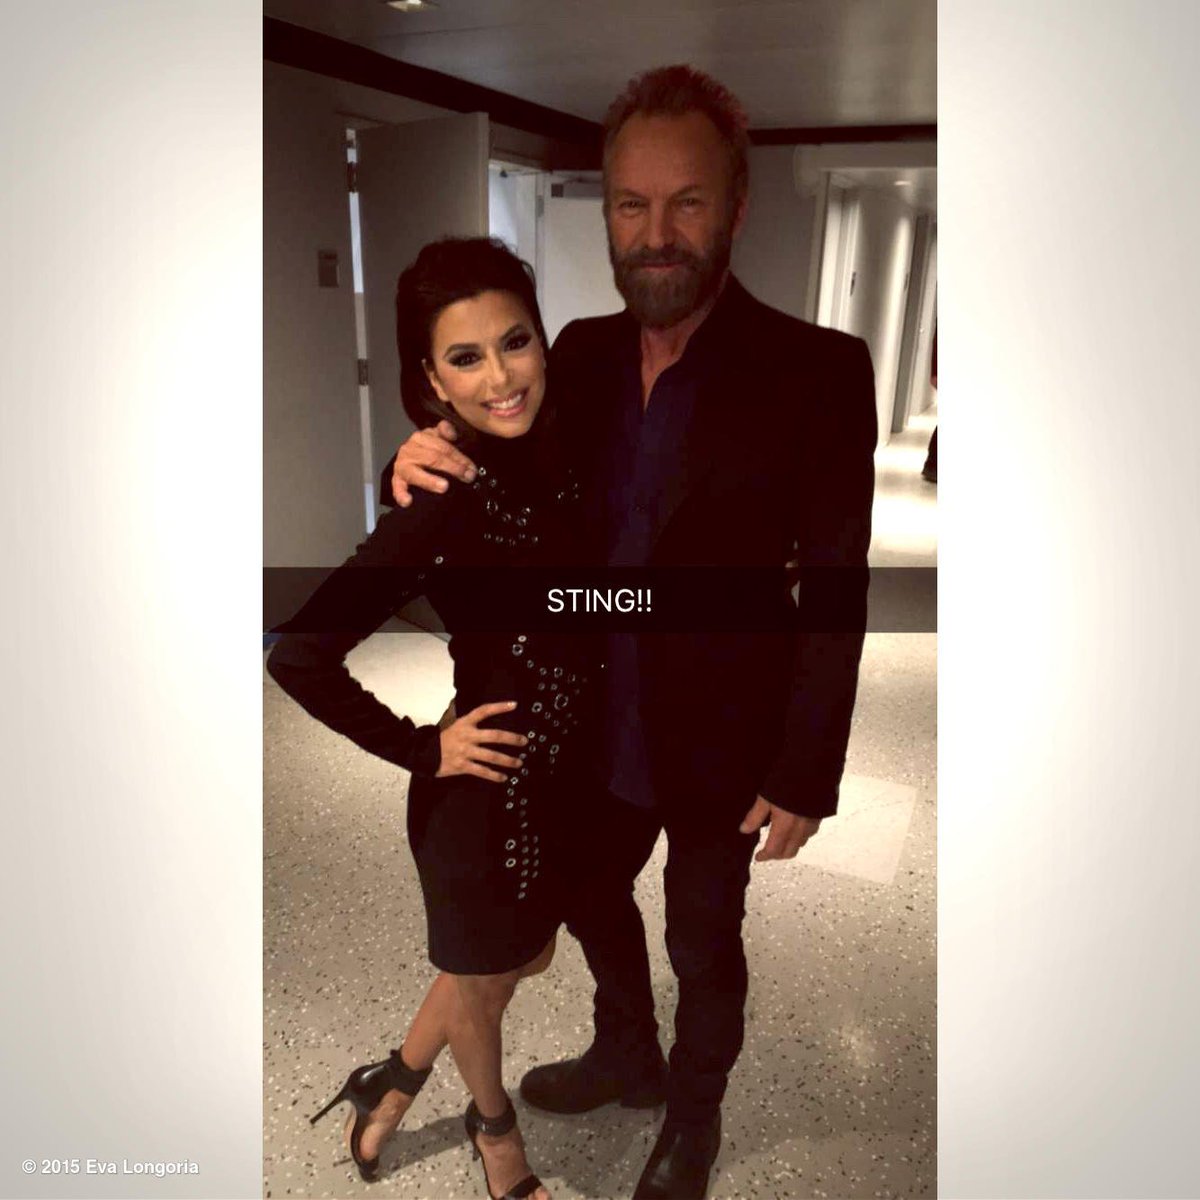 I mean not everyday you get to hang with STING! #LifeMoment #HolyS$&! #FanGirl https://t.co/5ngofFNjsO